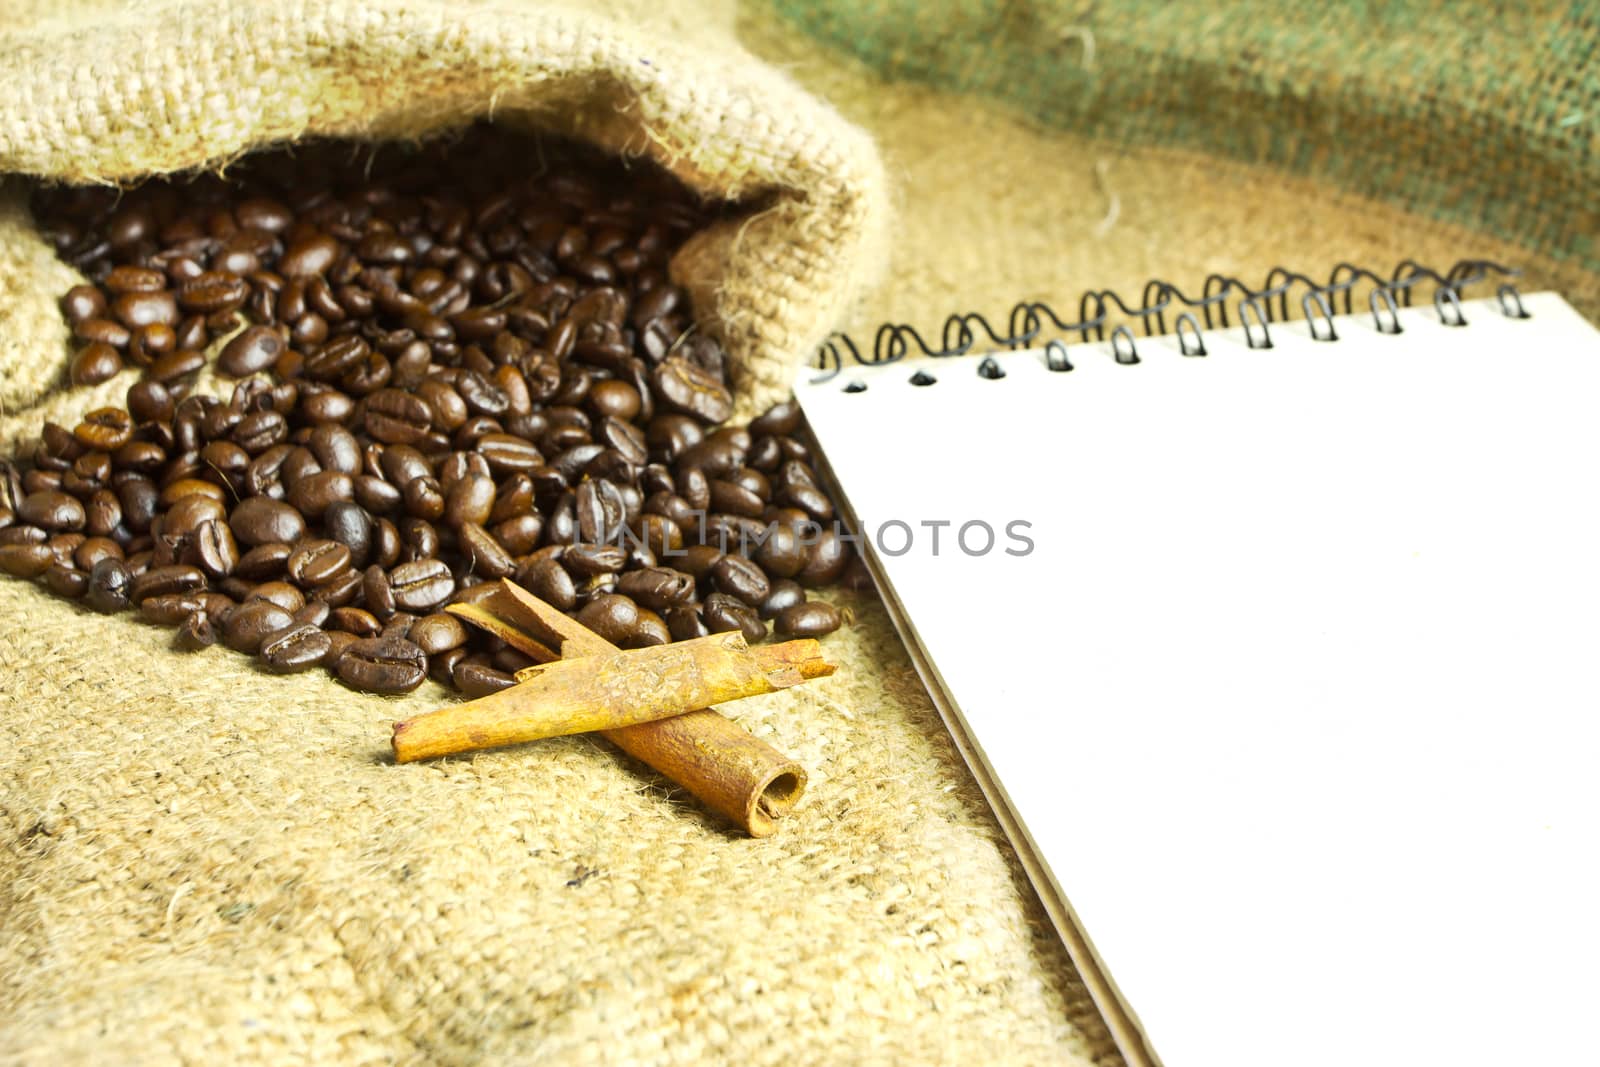 Notebook and coffee beans  by wyoosumran